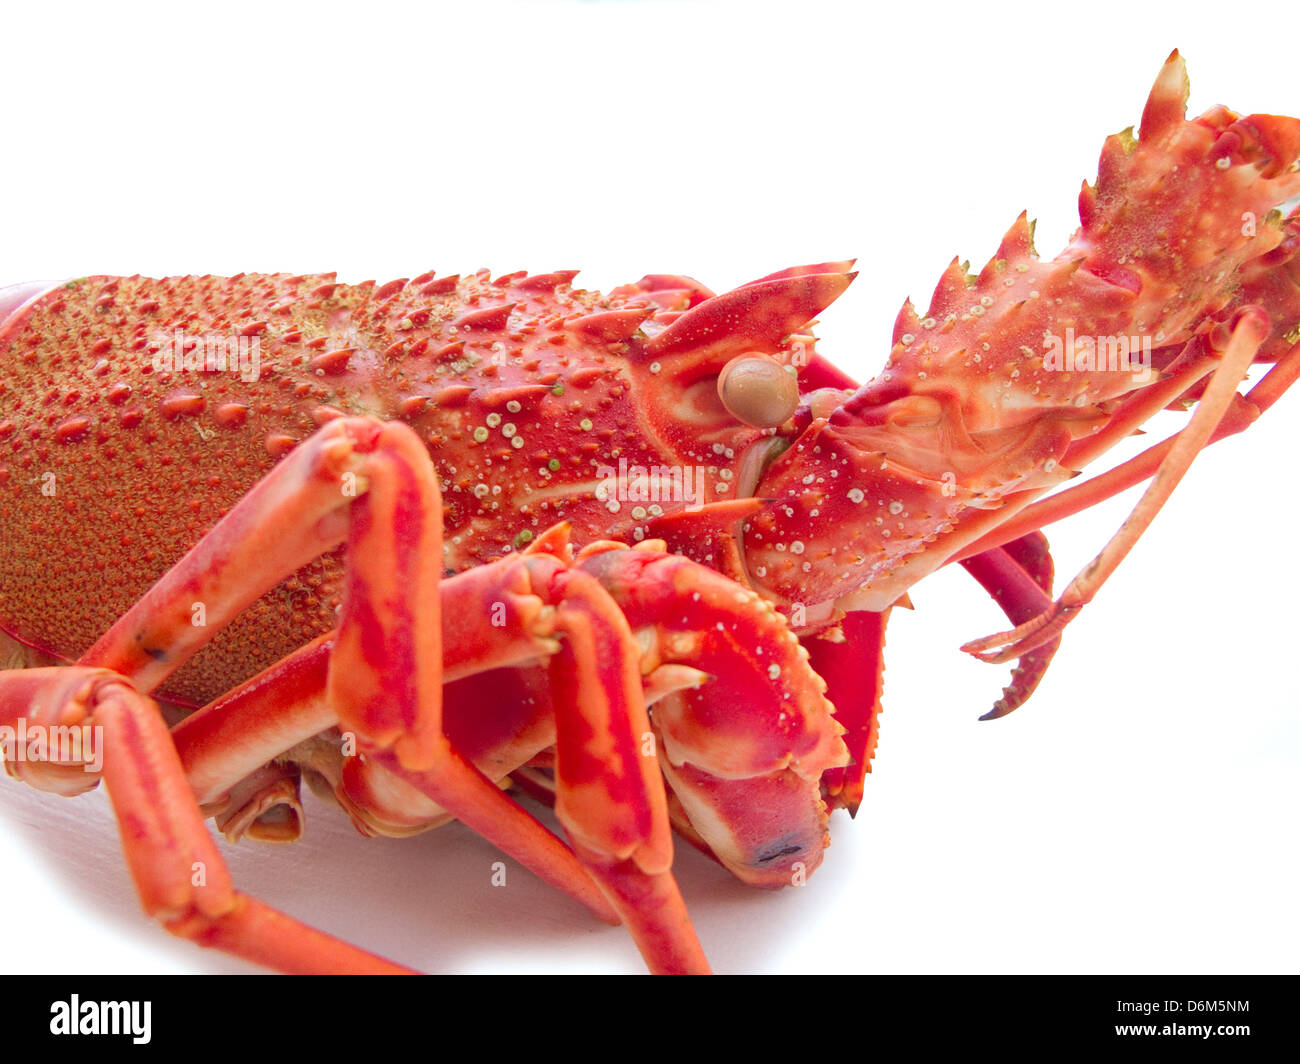 Detail of cooked red lobster on white background Stock Photo